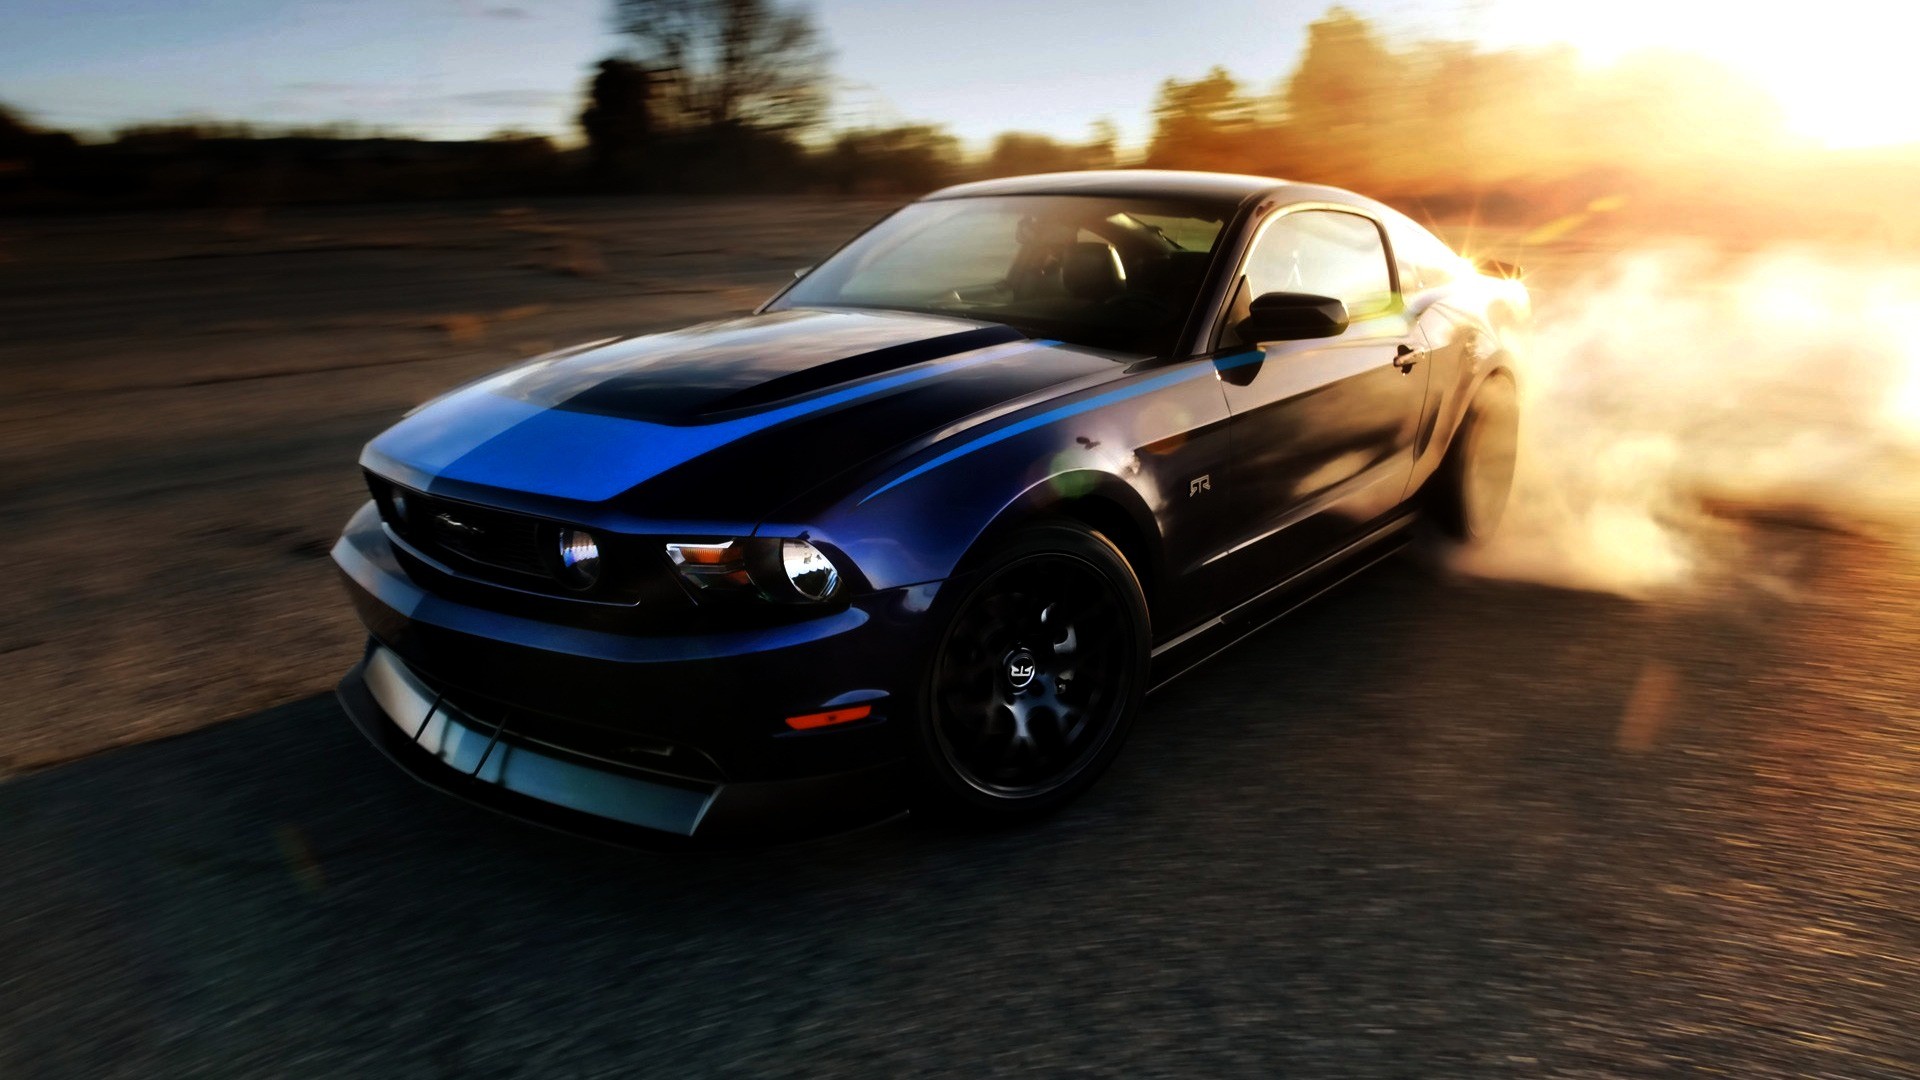 Cars Muscle Wallpaper 1920x1080 Cars Muscle Cars Dust Ford